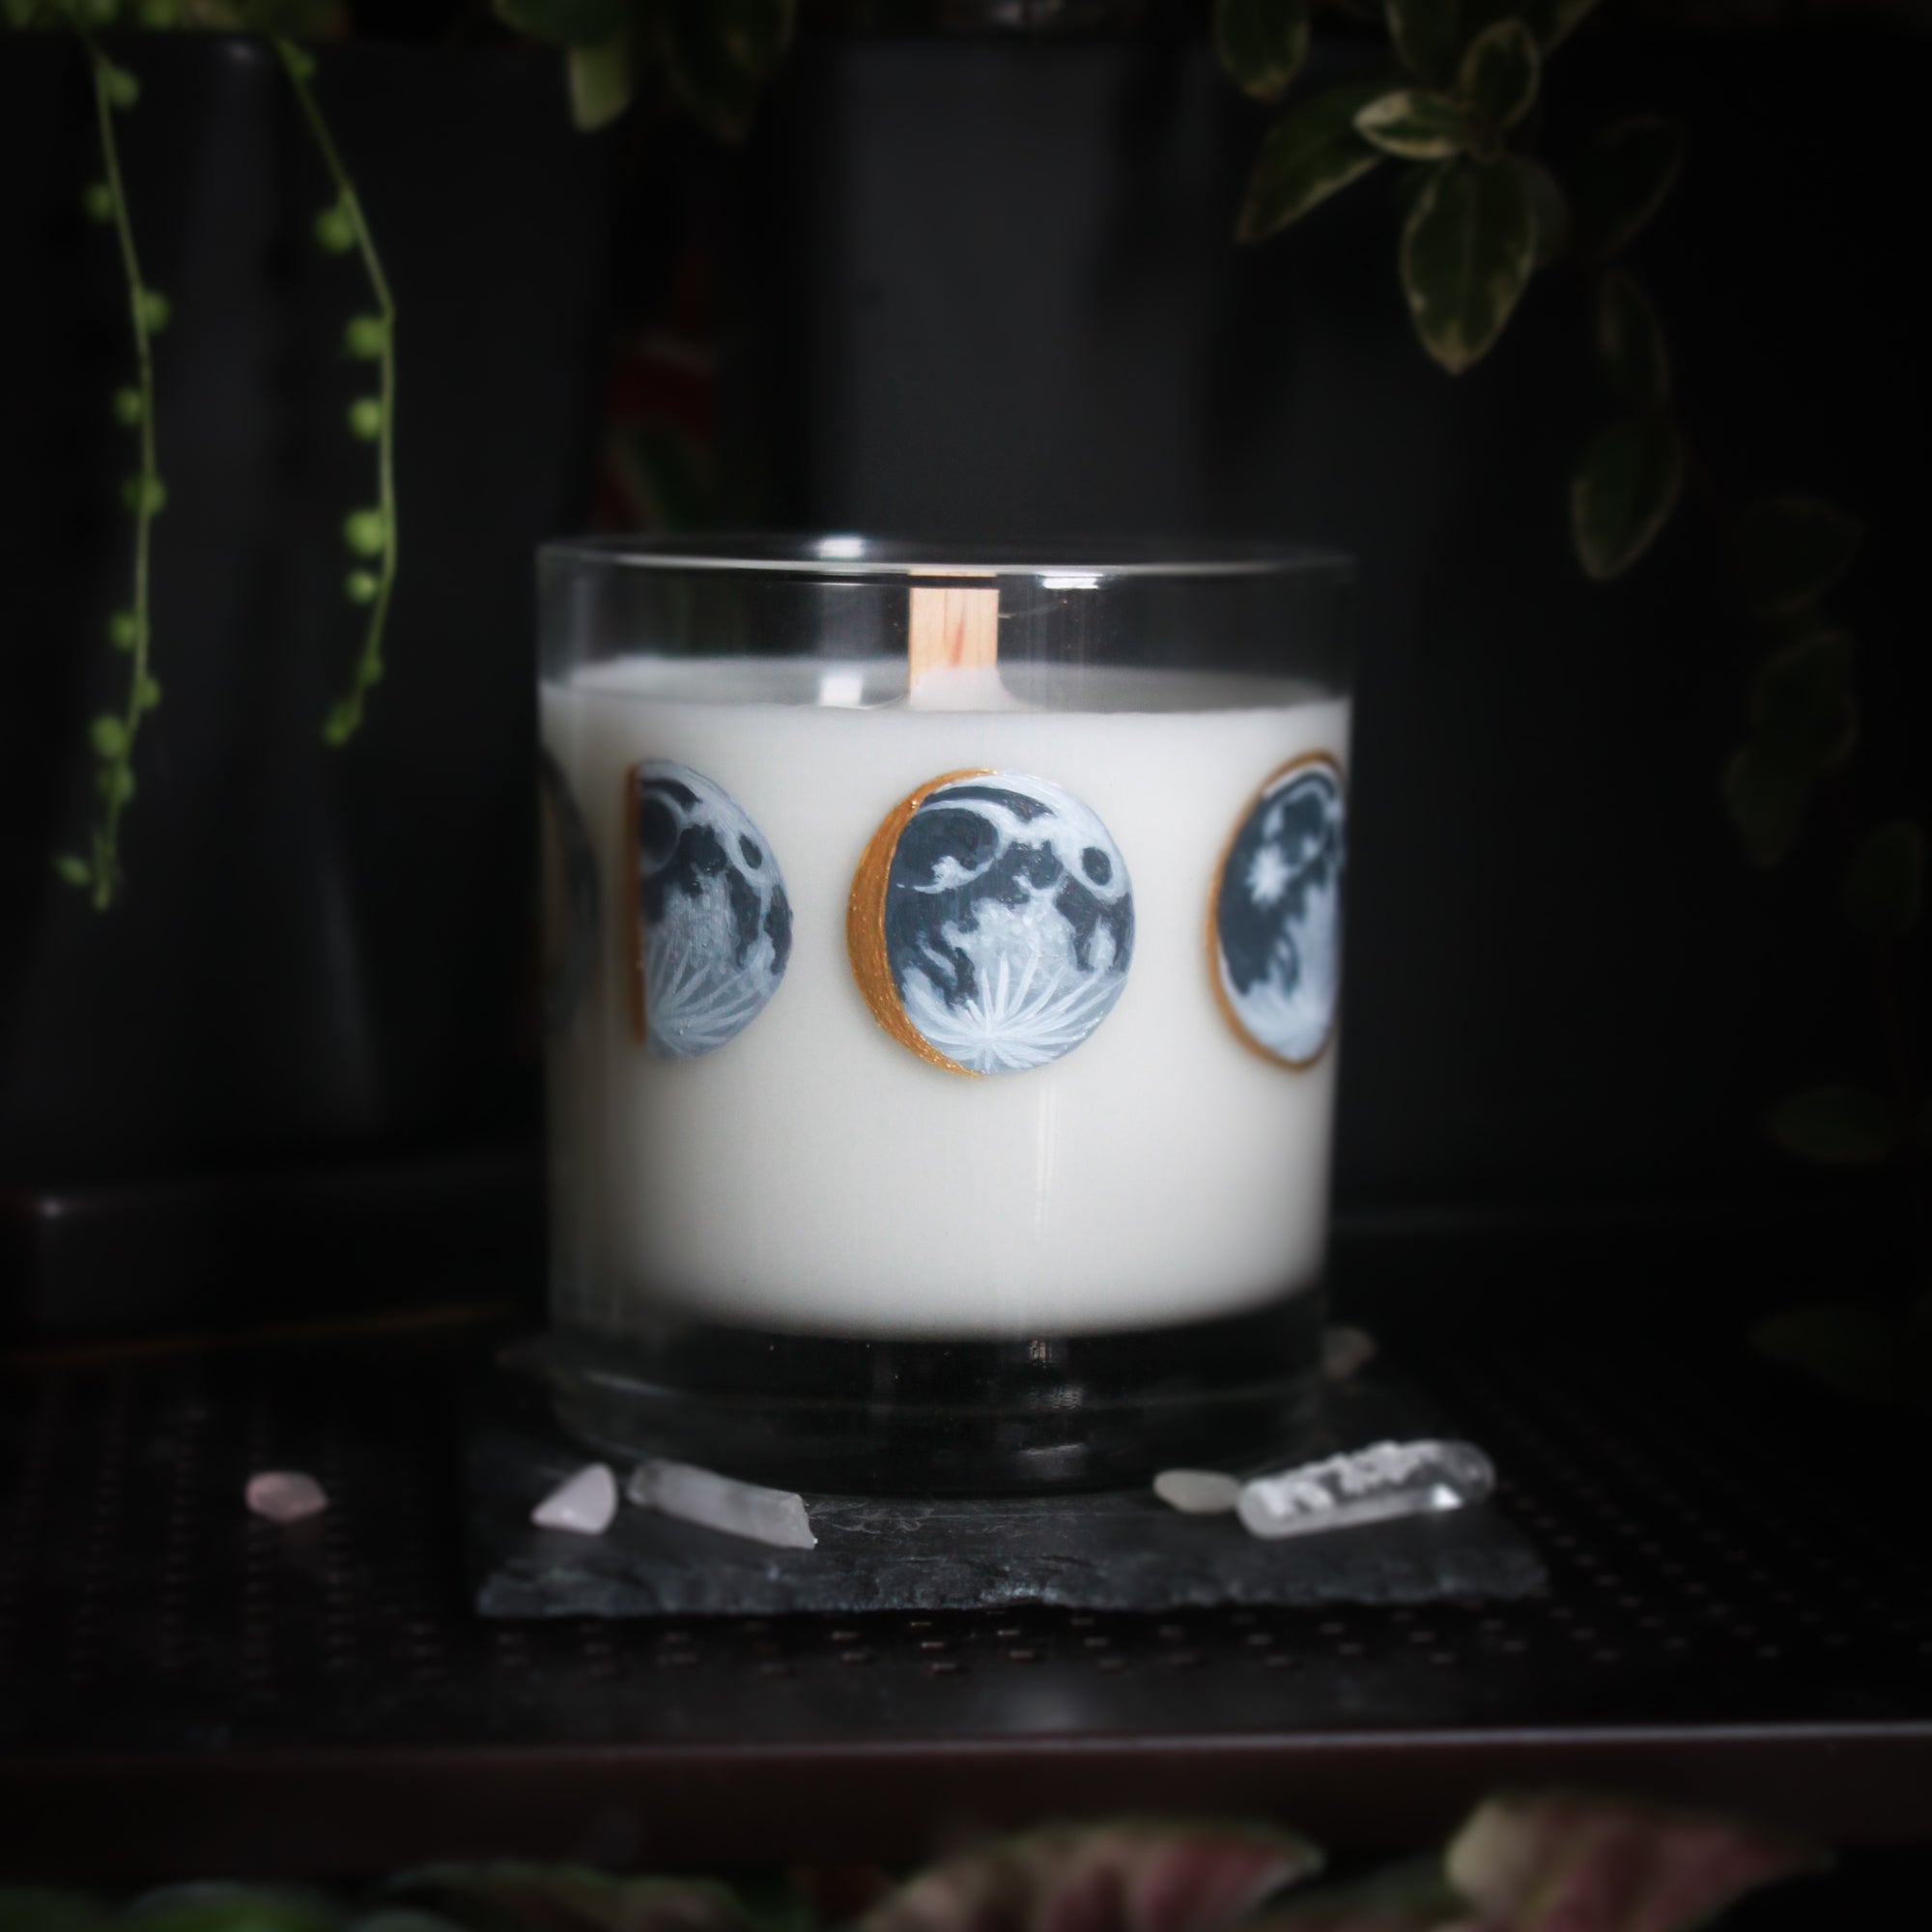 A white-wax candle with a wooden wick rests upon a dark surface with plants and crystals visible in the scene. The light candle stands out in contrast against the dark background. The candle glass has 8 phases of the moon painted in shades of gray with gold accents circling the glass. This angle depicts the waxing gibbous moon centered with the waxing half moon to the left and the full moon to the right.